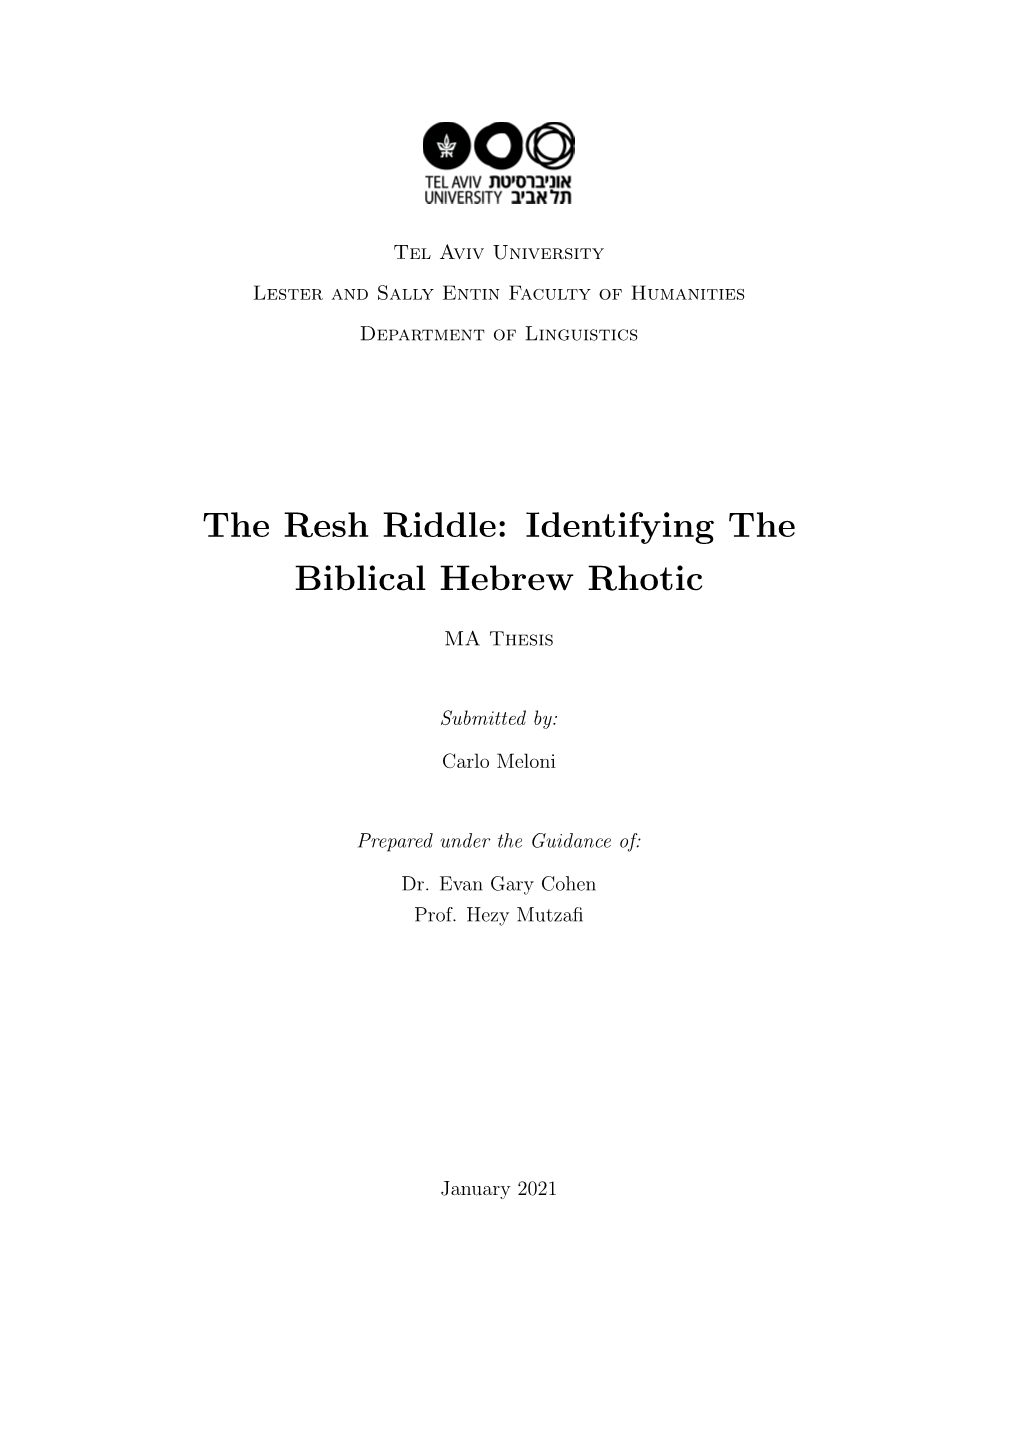 The Resh Riddle: Identifying the Biblical Hebrew Rhotic